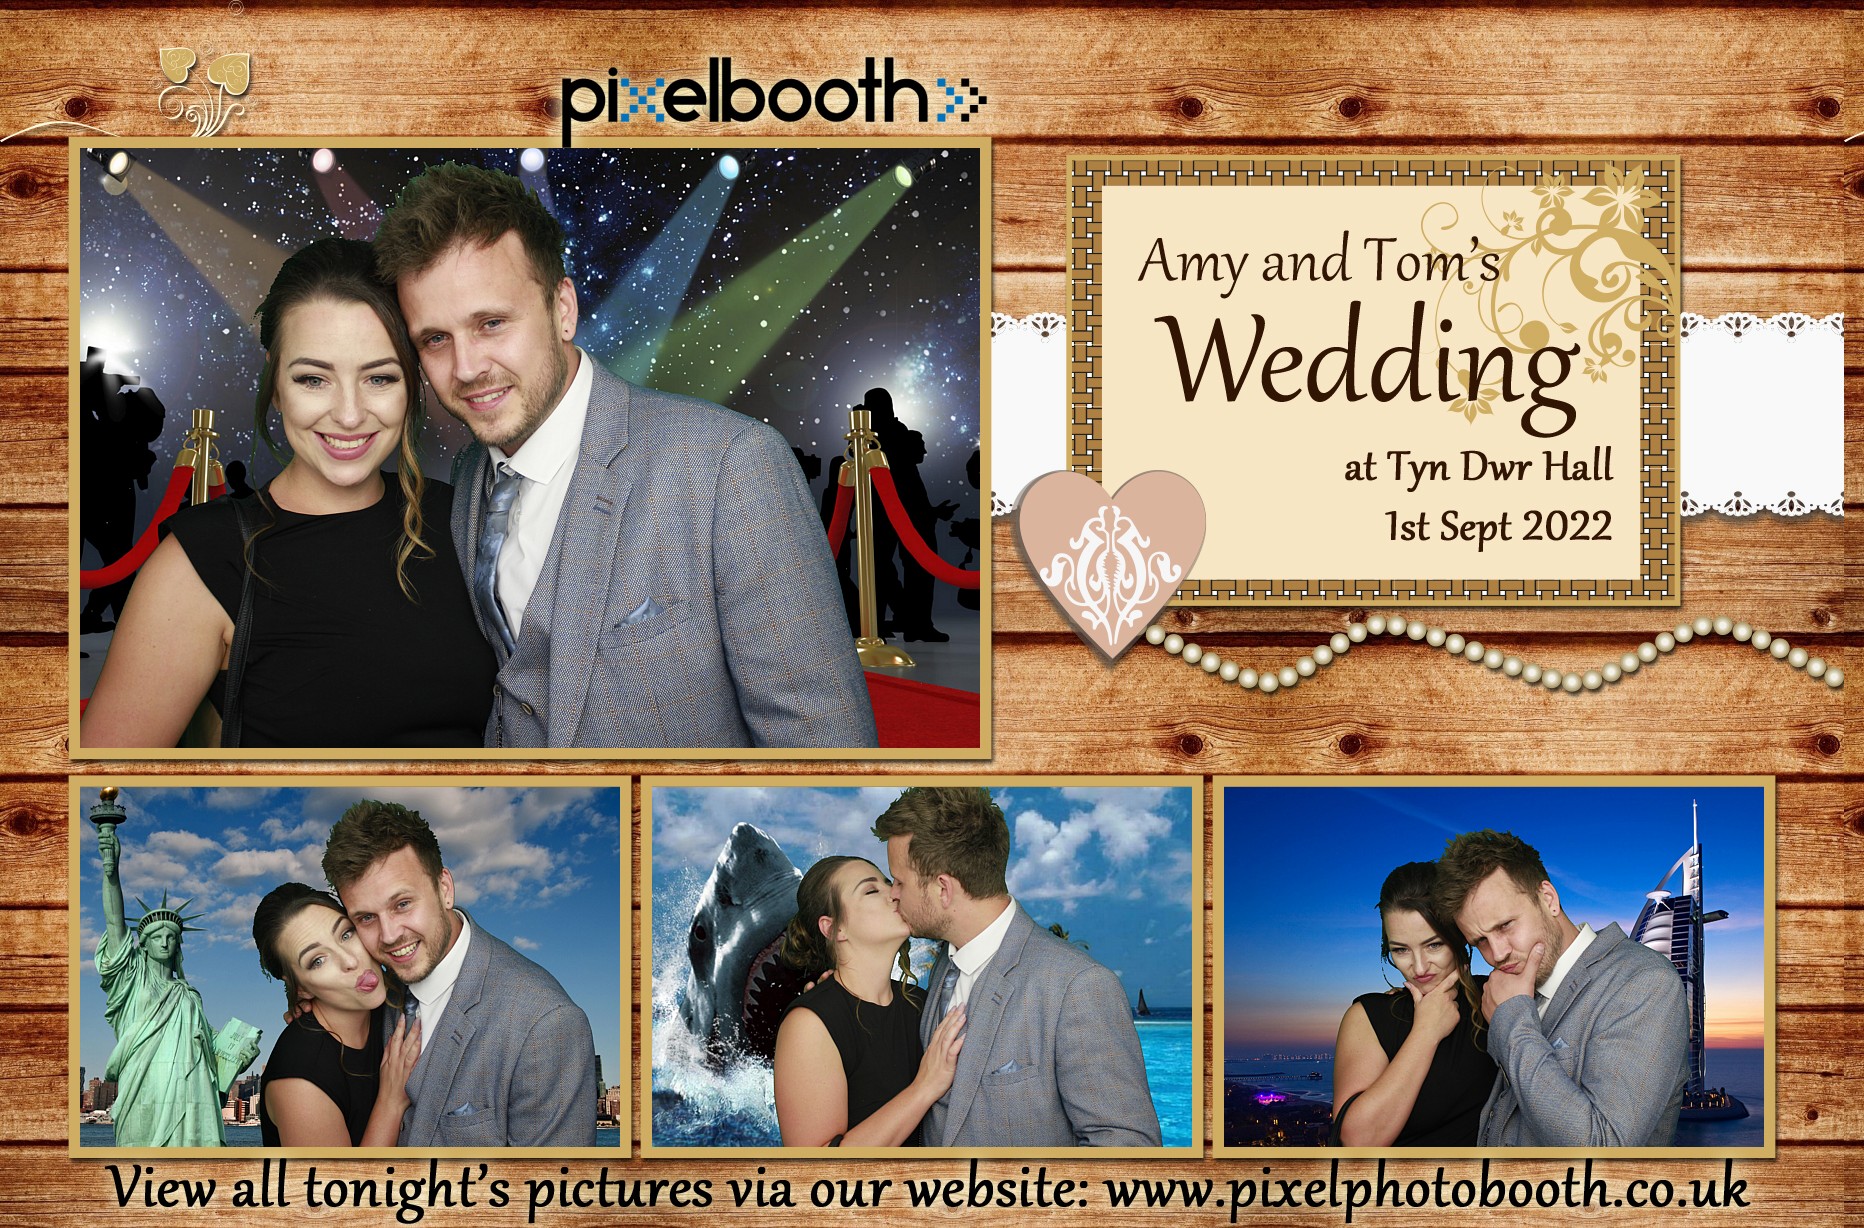 1st Sept 2022: Amy and Tom's Wedding at Tyn Dwr Hall